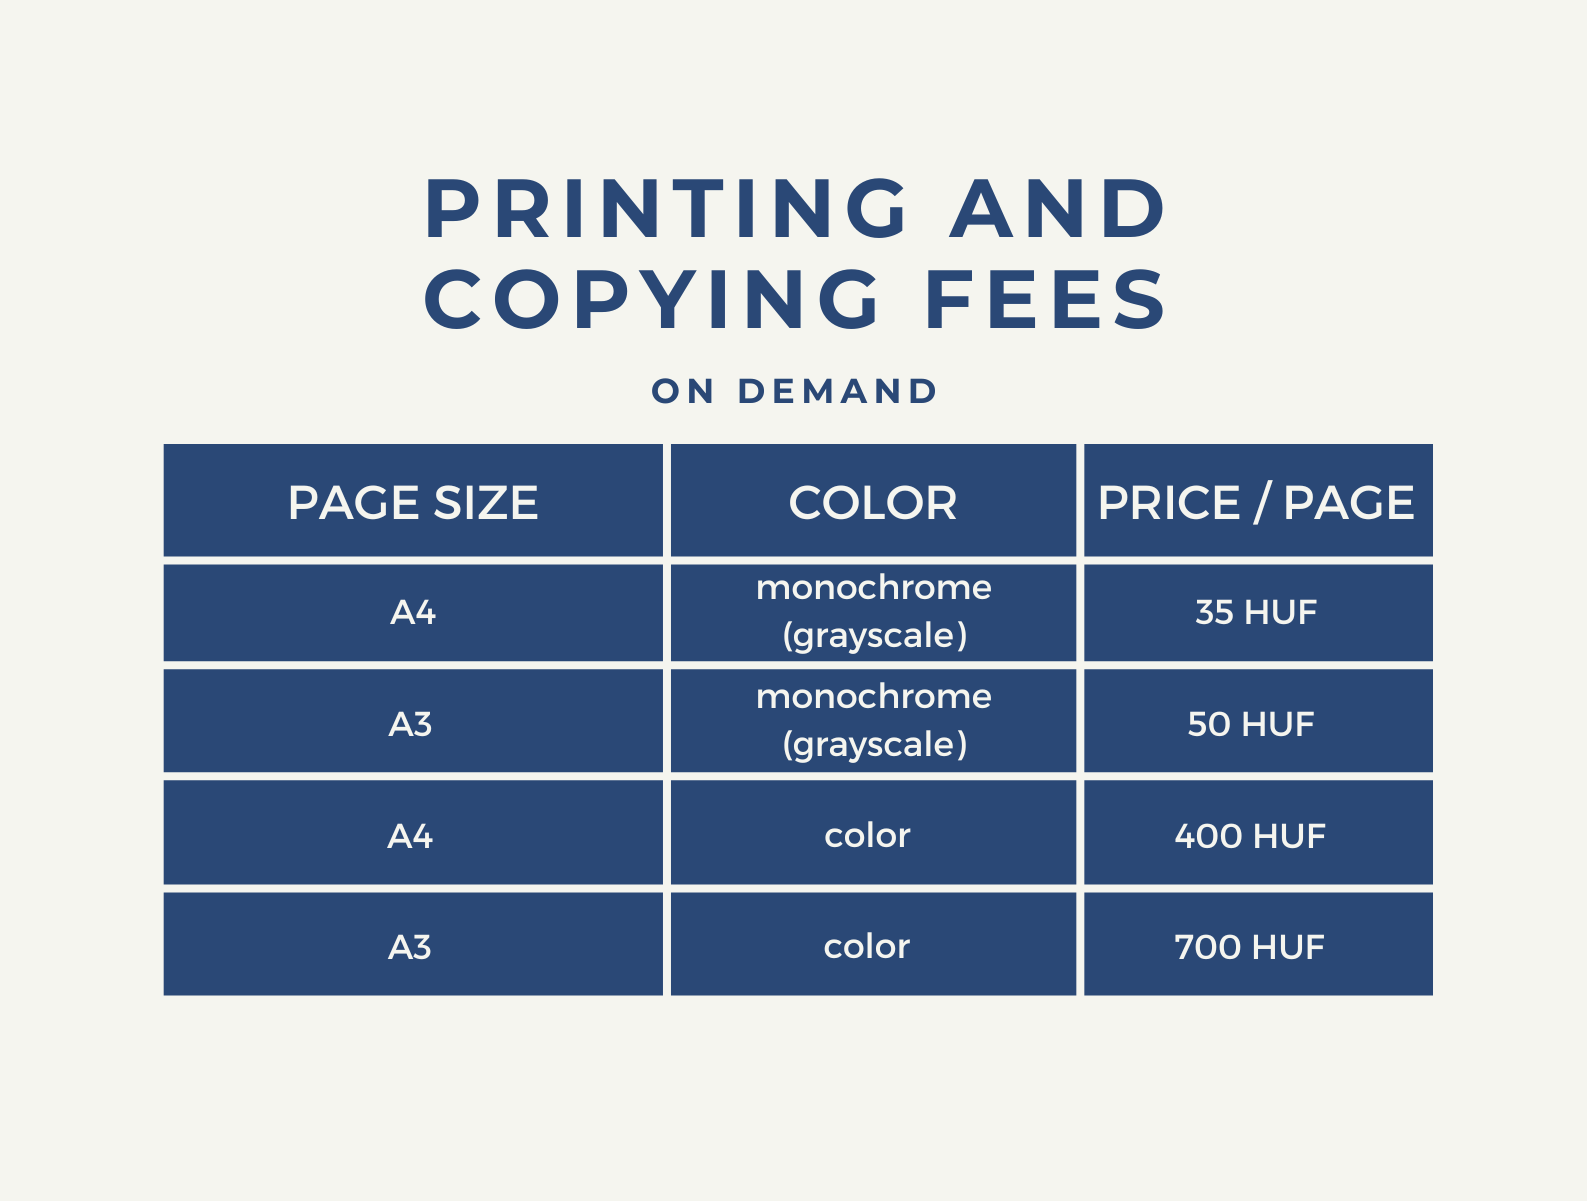 Price table printing to order: A4 black and white 35 HUF/page, A3 black and white 60 HUF/page, A4 color 400 HUF/page, A3 color 700 HUF/page